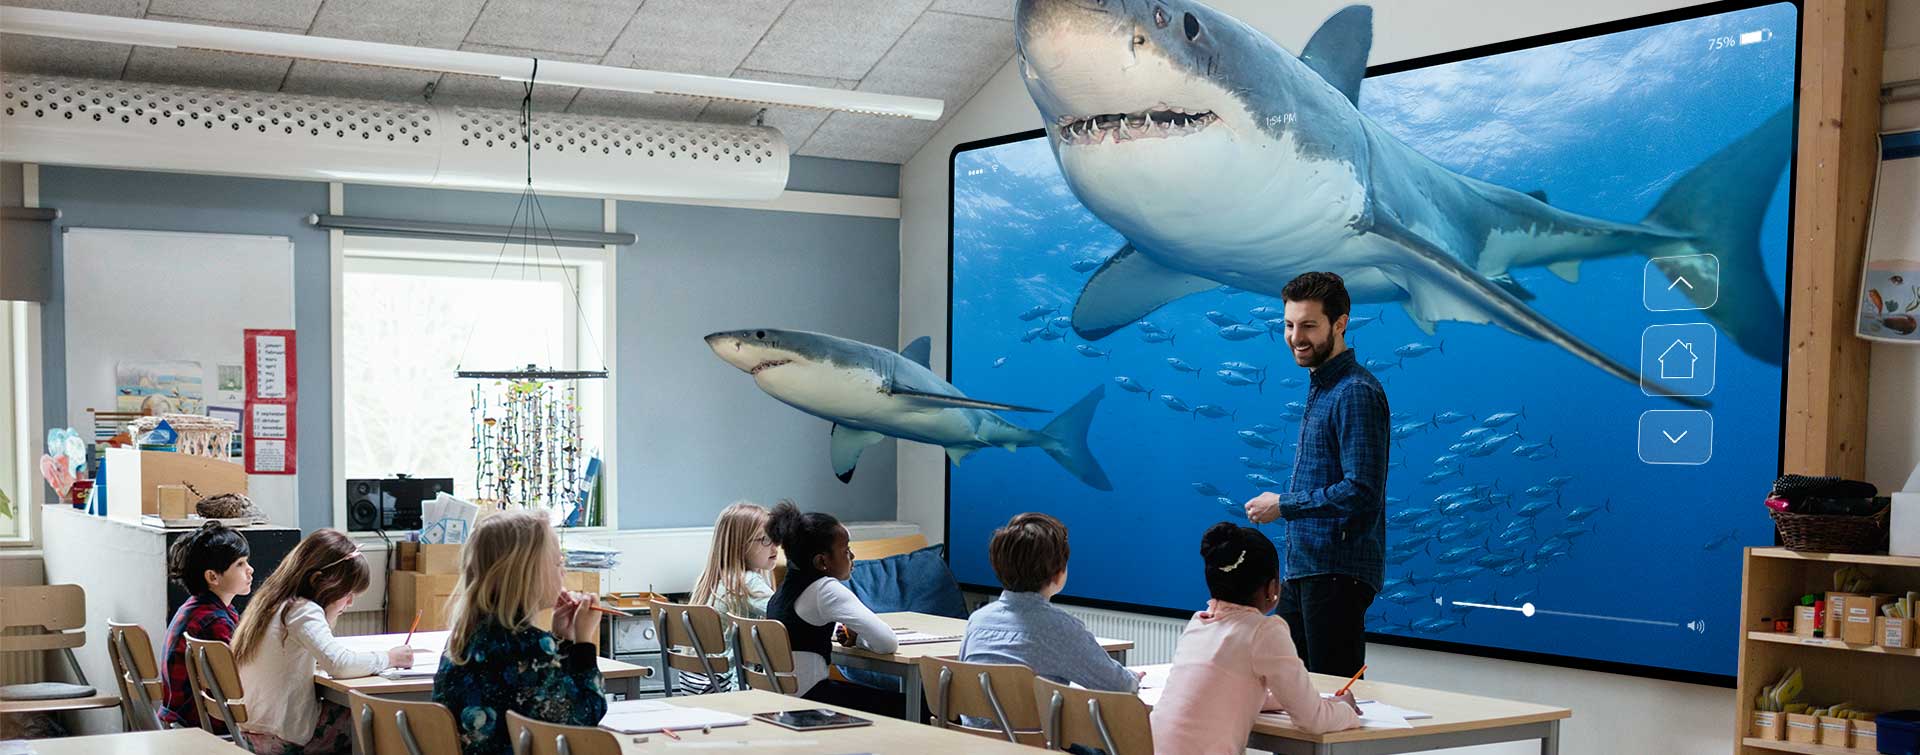 Sharks in classroom with students and teacher